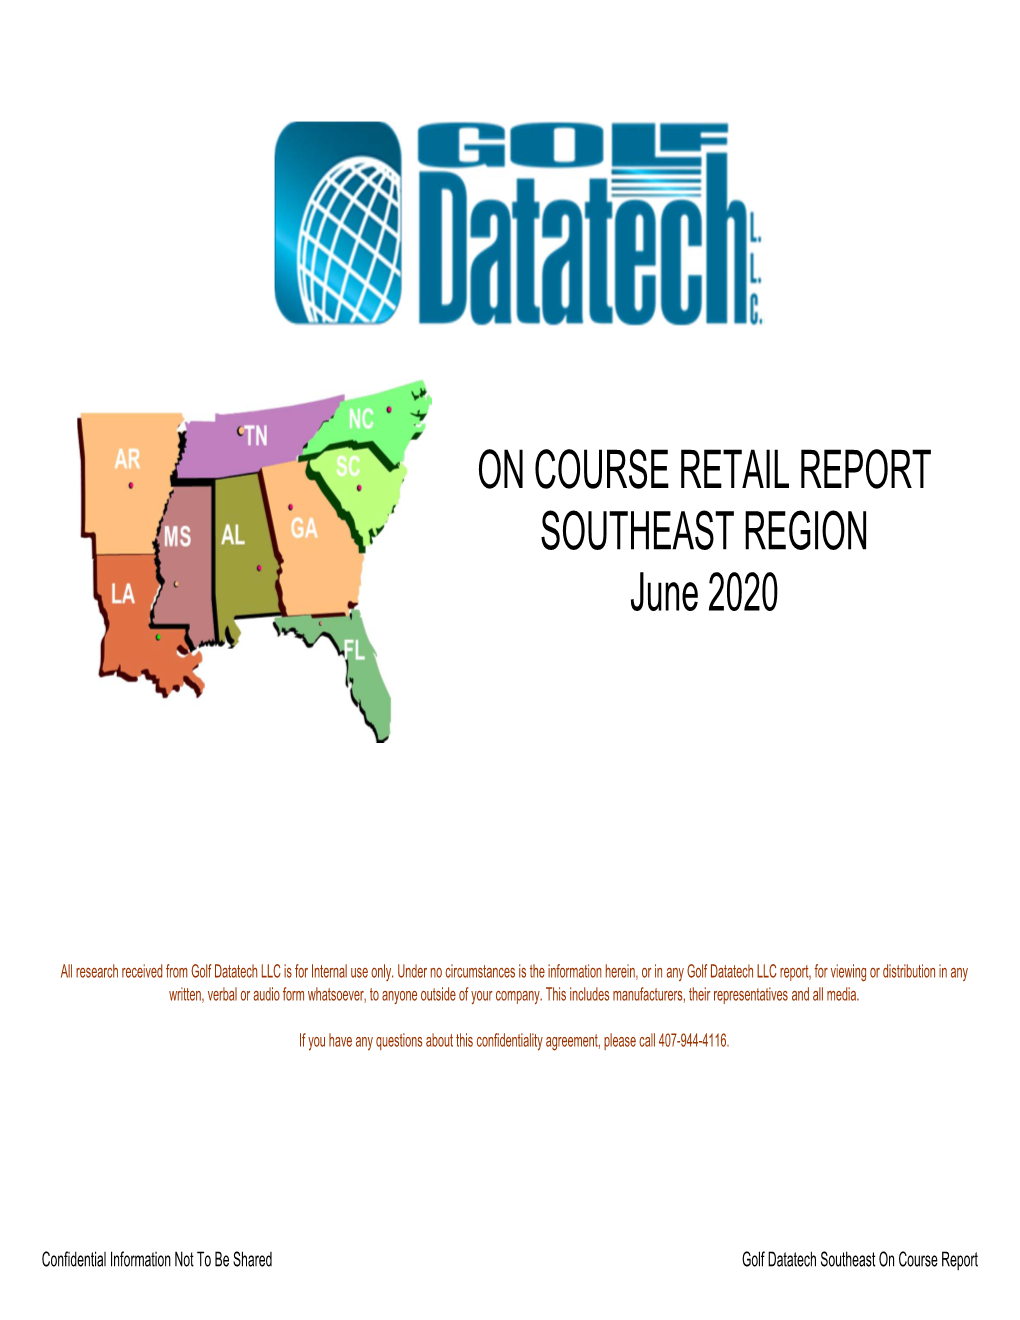 GDT Southeast Region on Course Report 0620